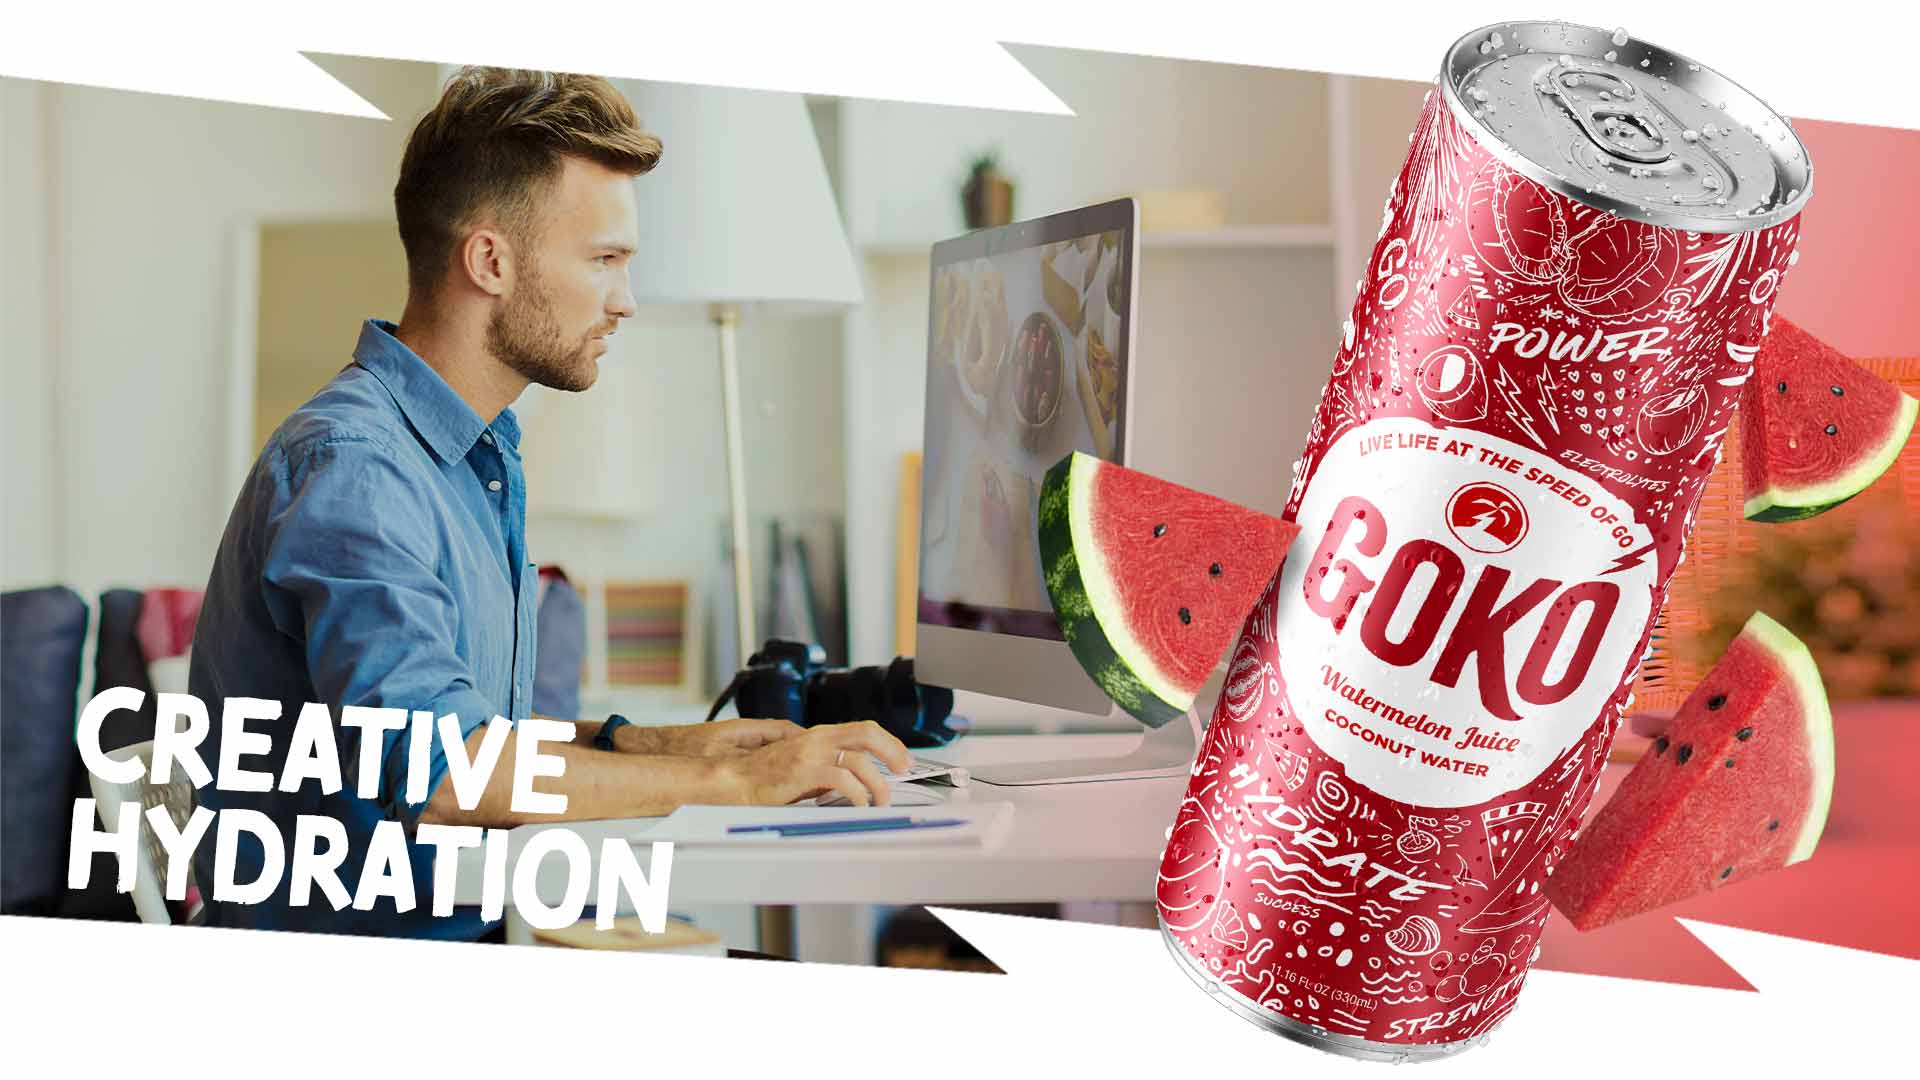 GoKo - Creative hydration from sparkling coconut water